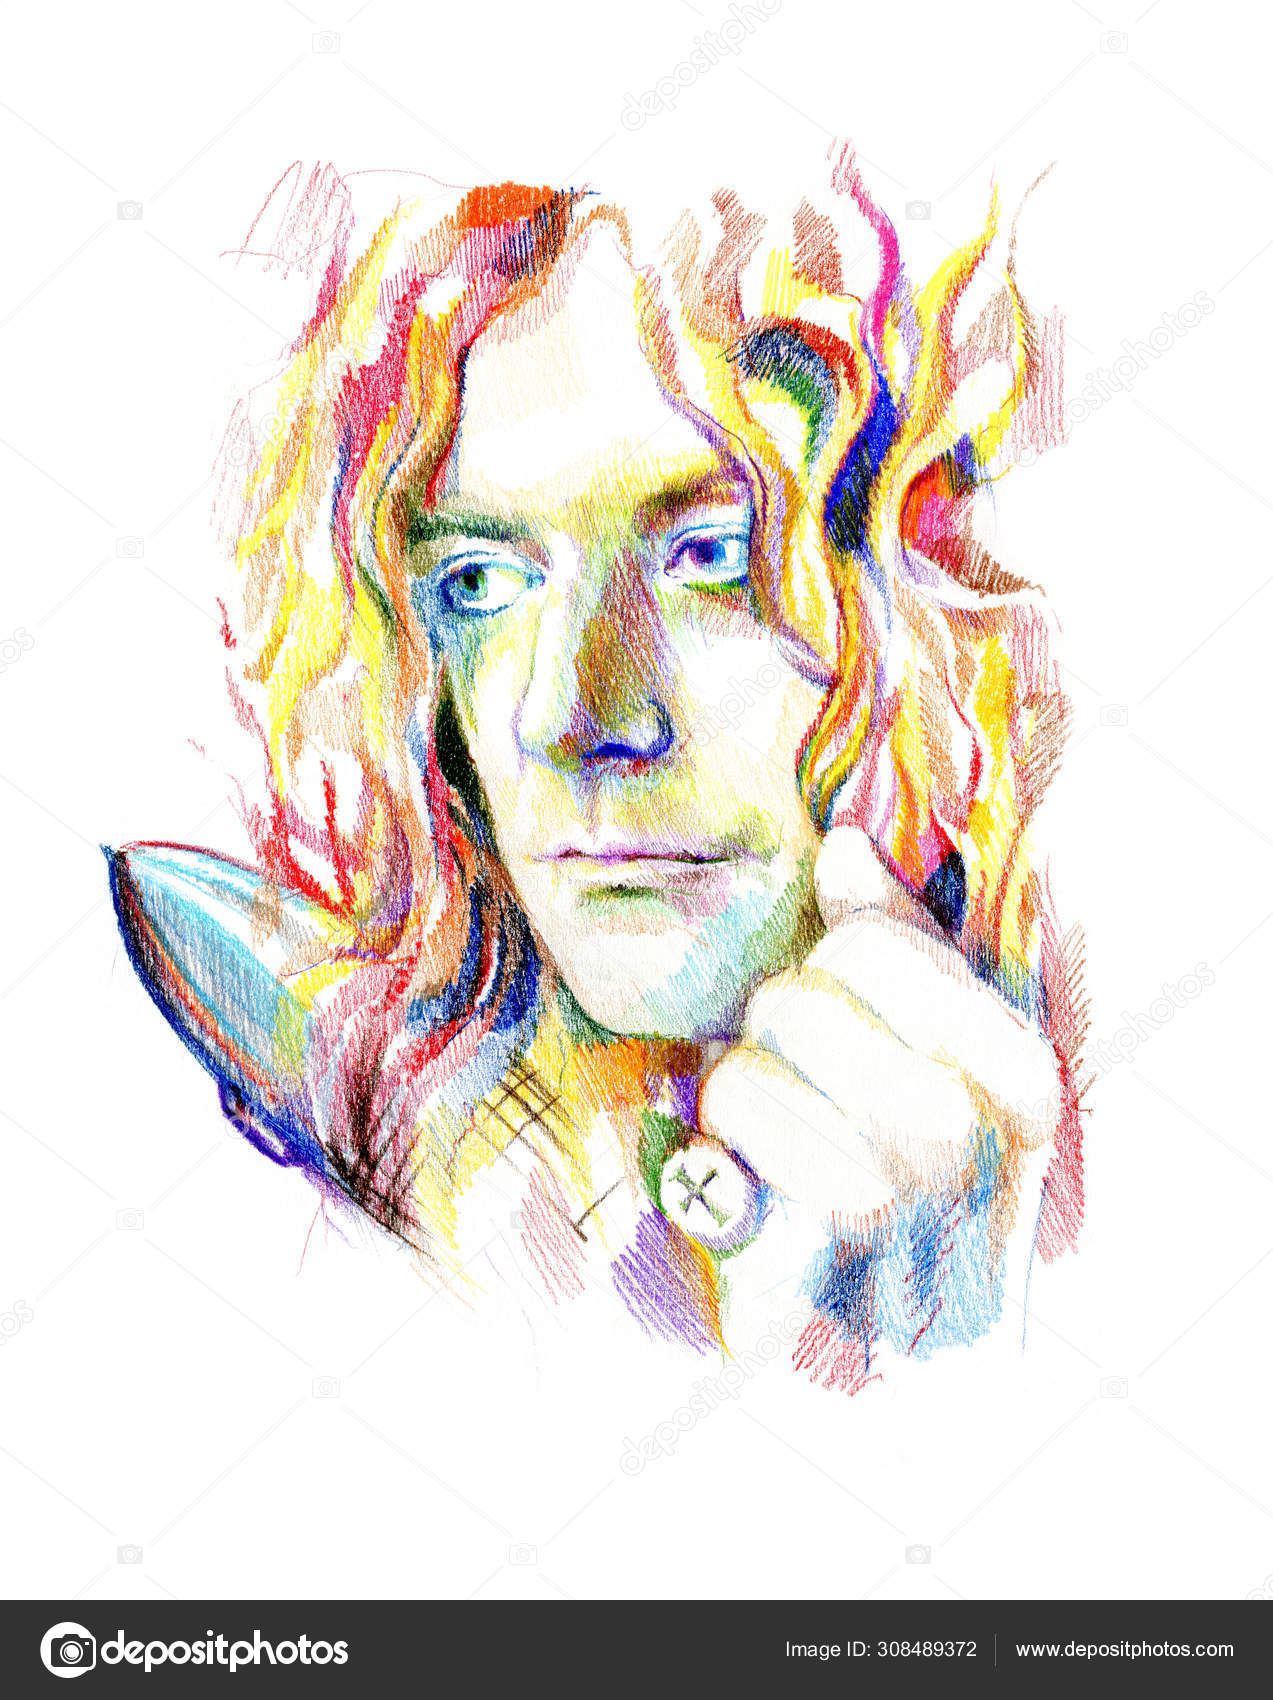 Its my sketch of a psychedelic Led zeppelin poster Hope you like it  9GAG